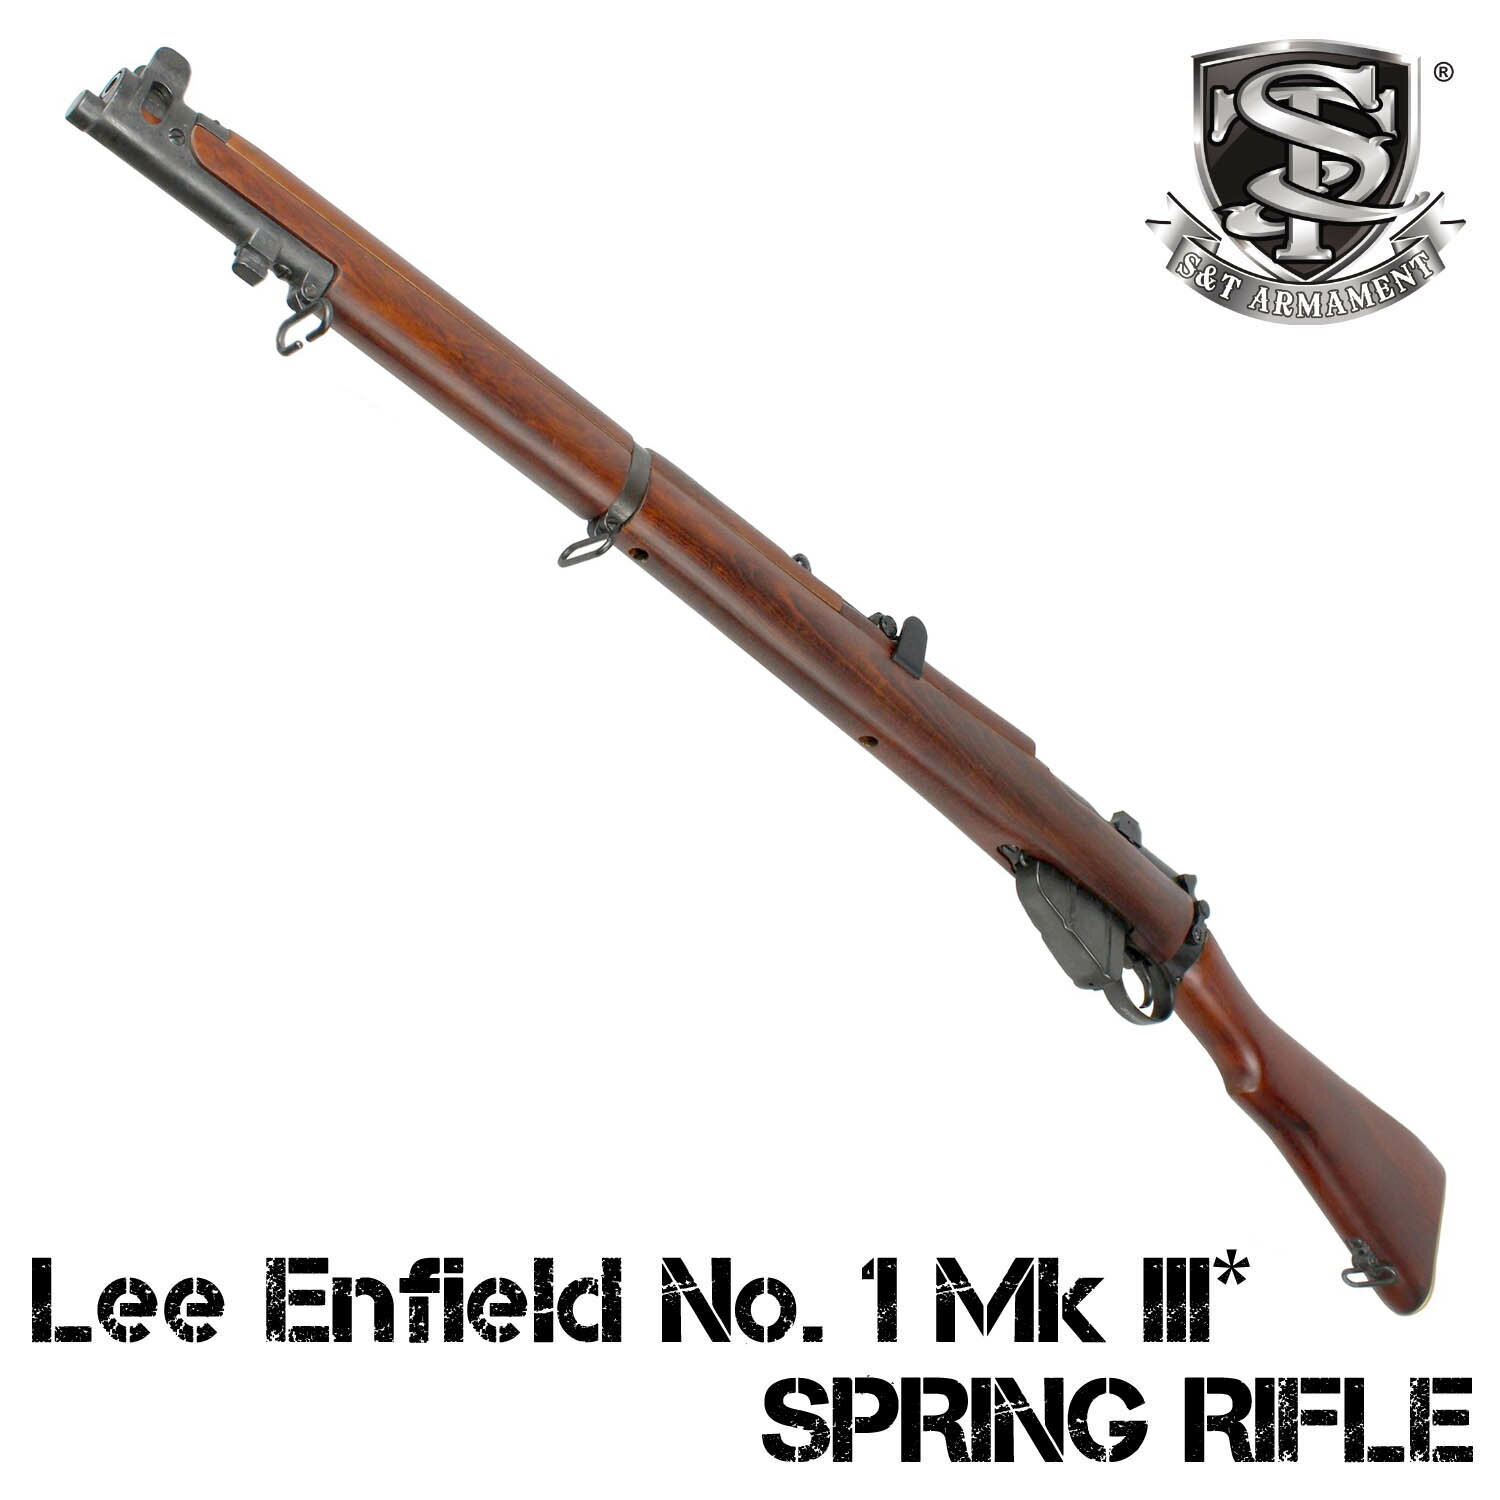 S T Lee Enfield No. 1 Mk III エアーコッキングライフル リアルウッド【180日間安心保証つき】